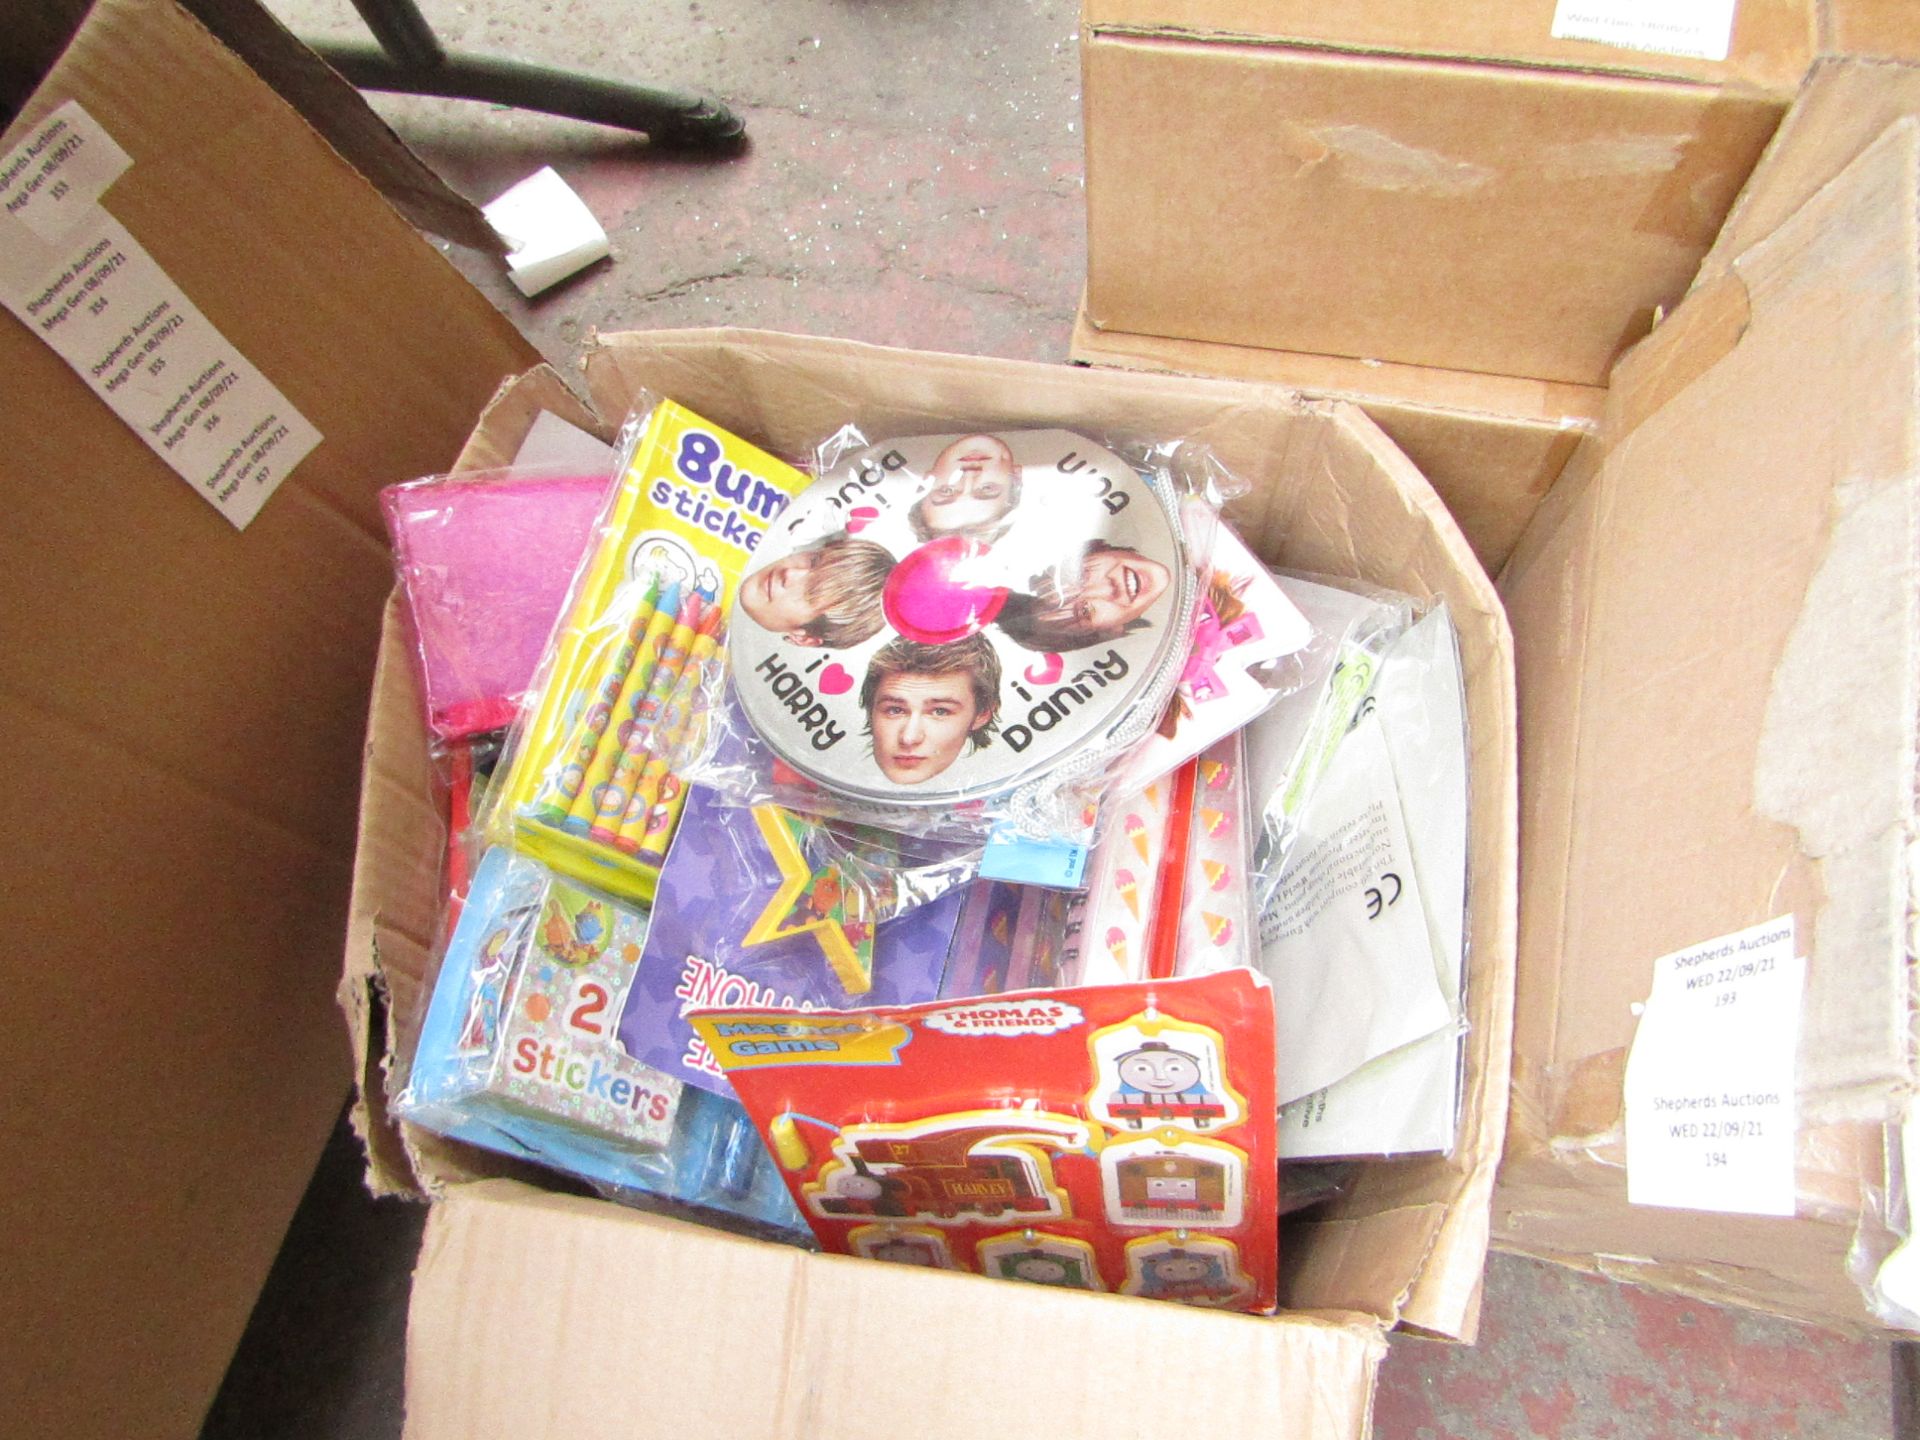 Box Containing Various Girls & Boys Branded Toys - Unused & Packaged.